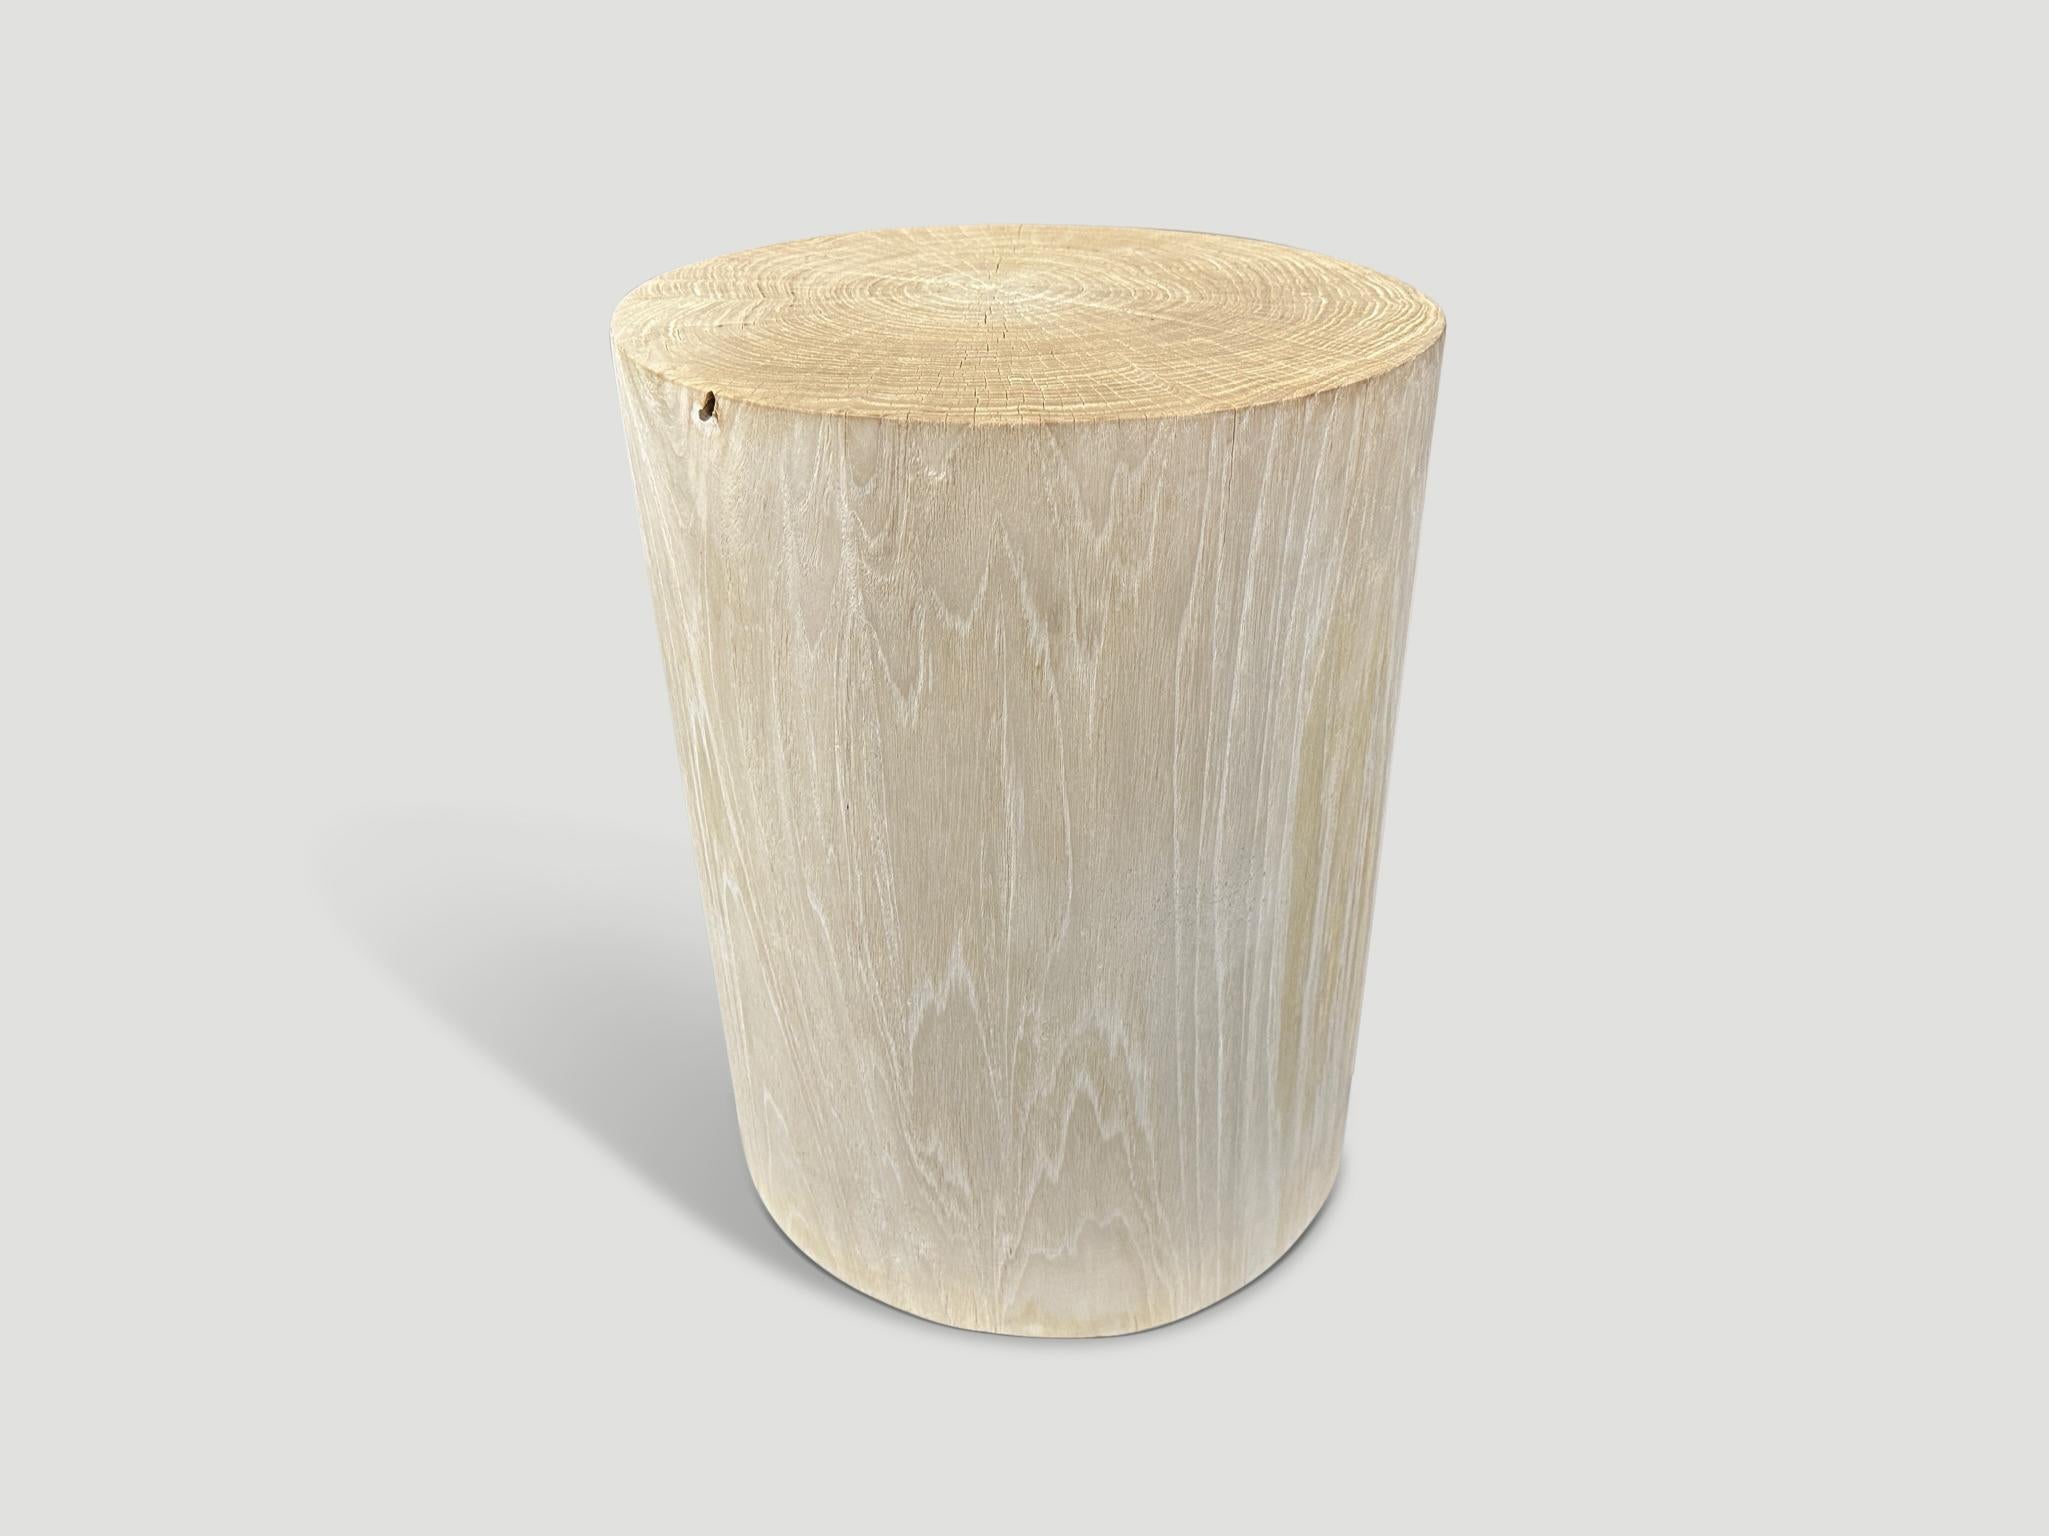 Organic Modern Andrianna Shamaris Cylinder Bleached Teak Wood Side Table or Stool  For Sale